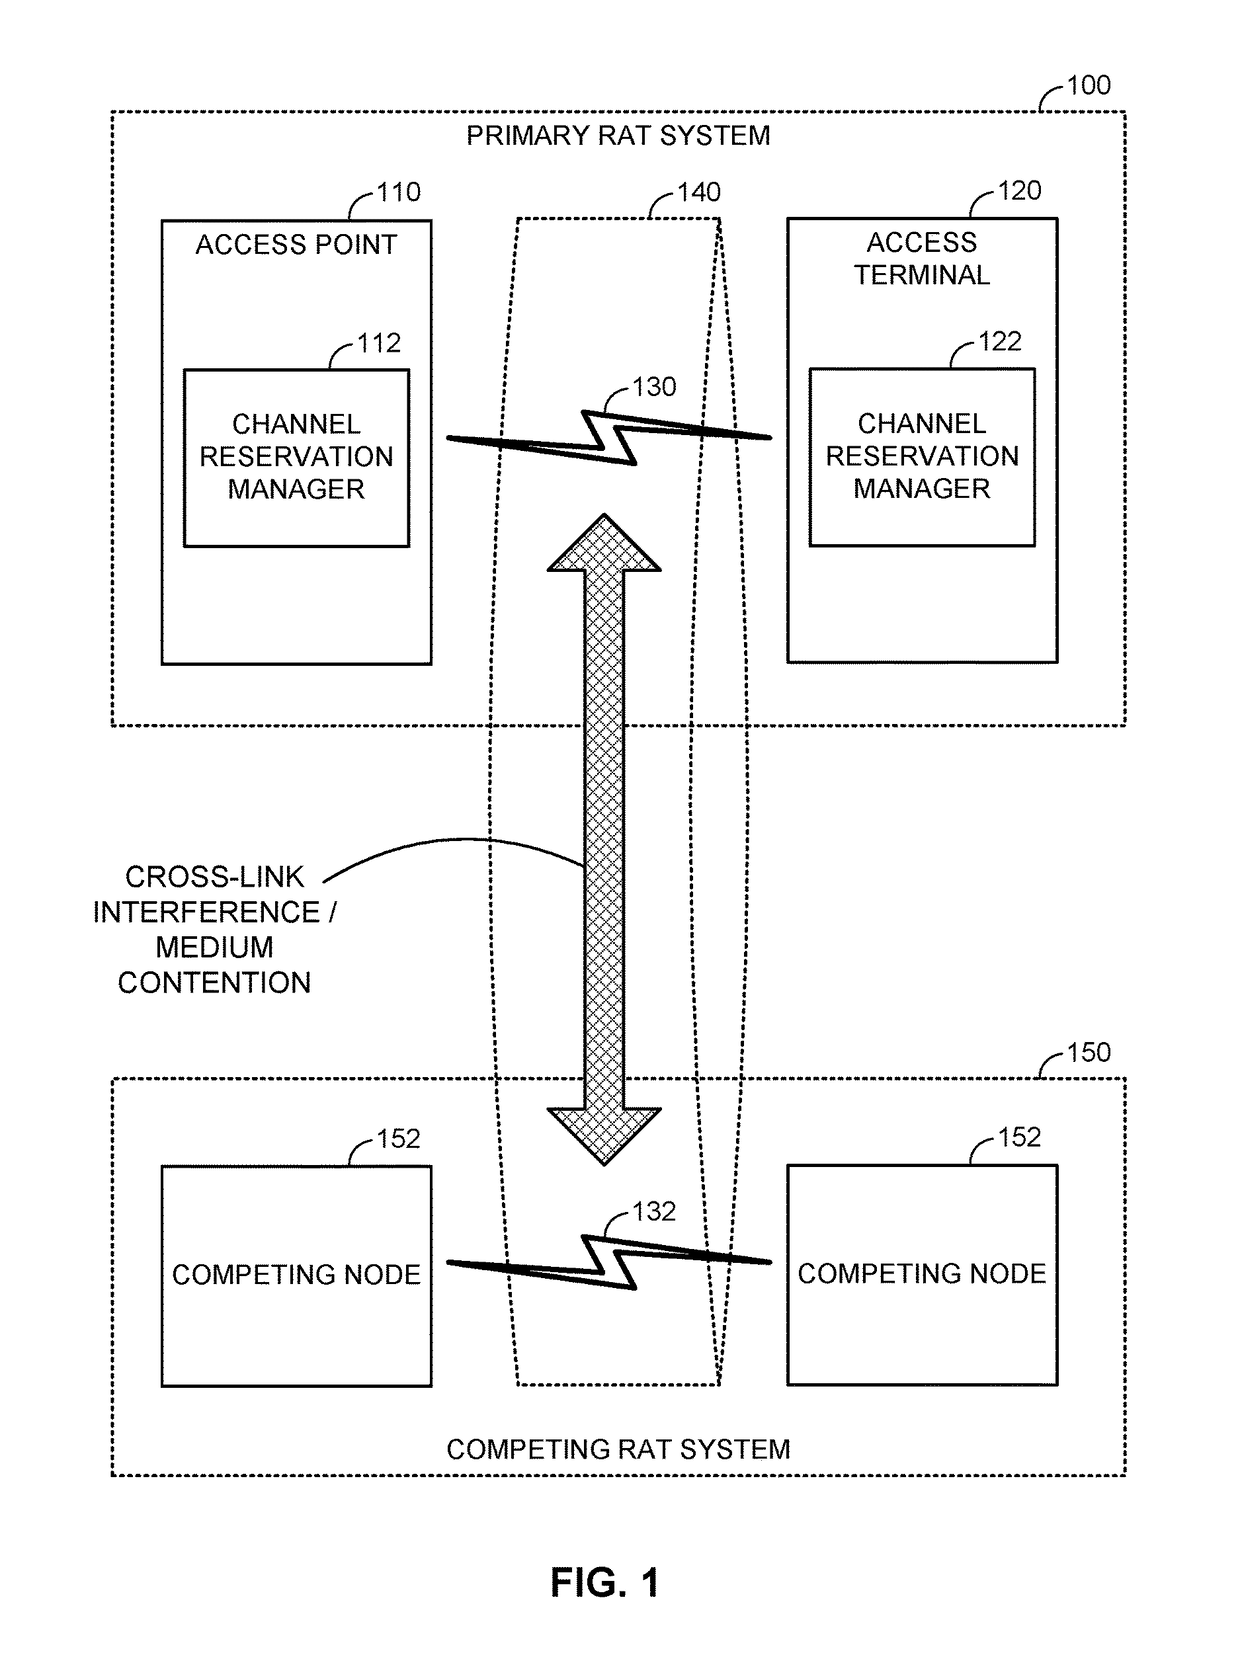 Robust channel reservation on a shared communication medium